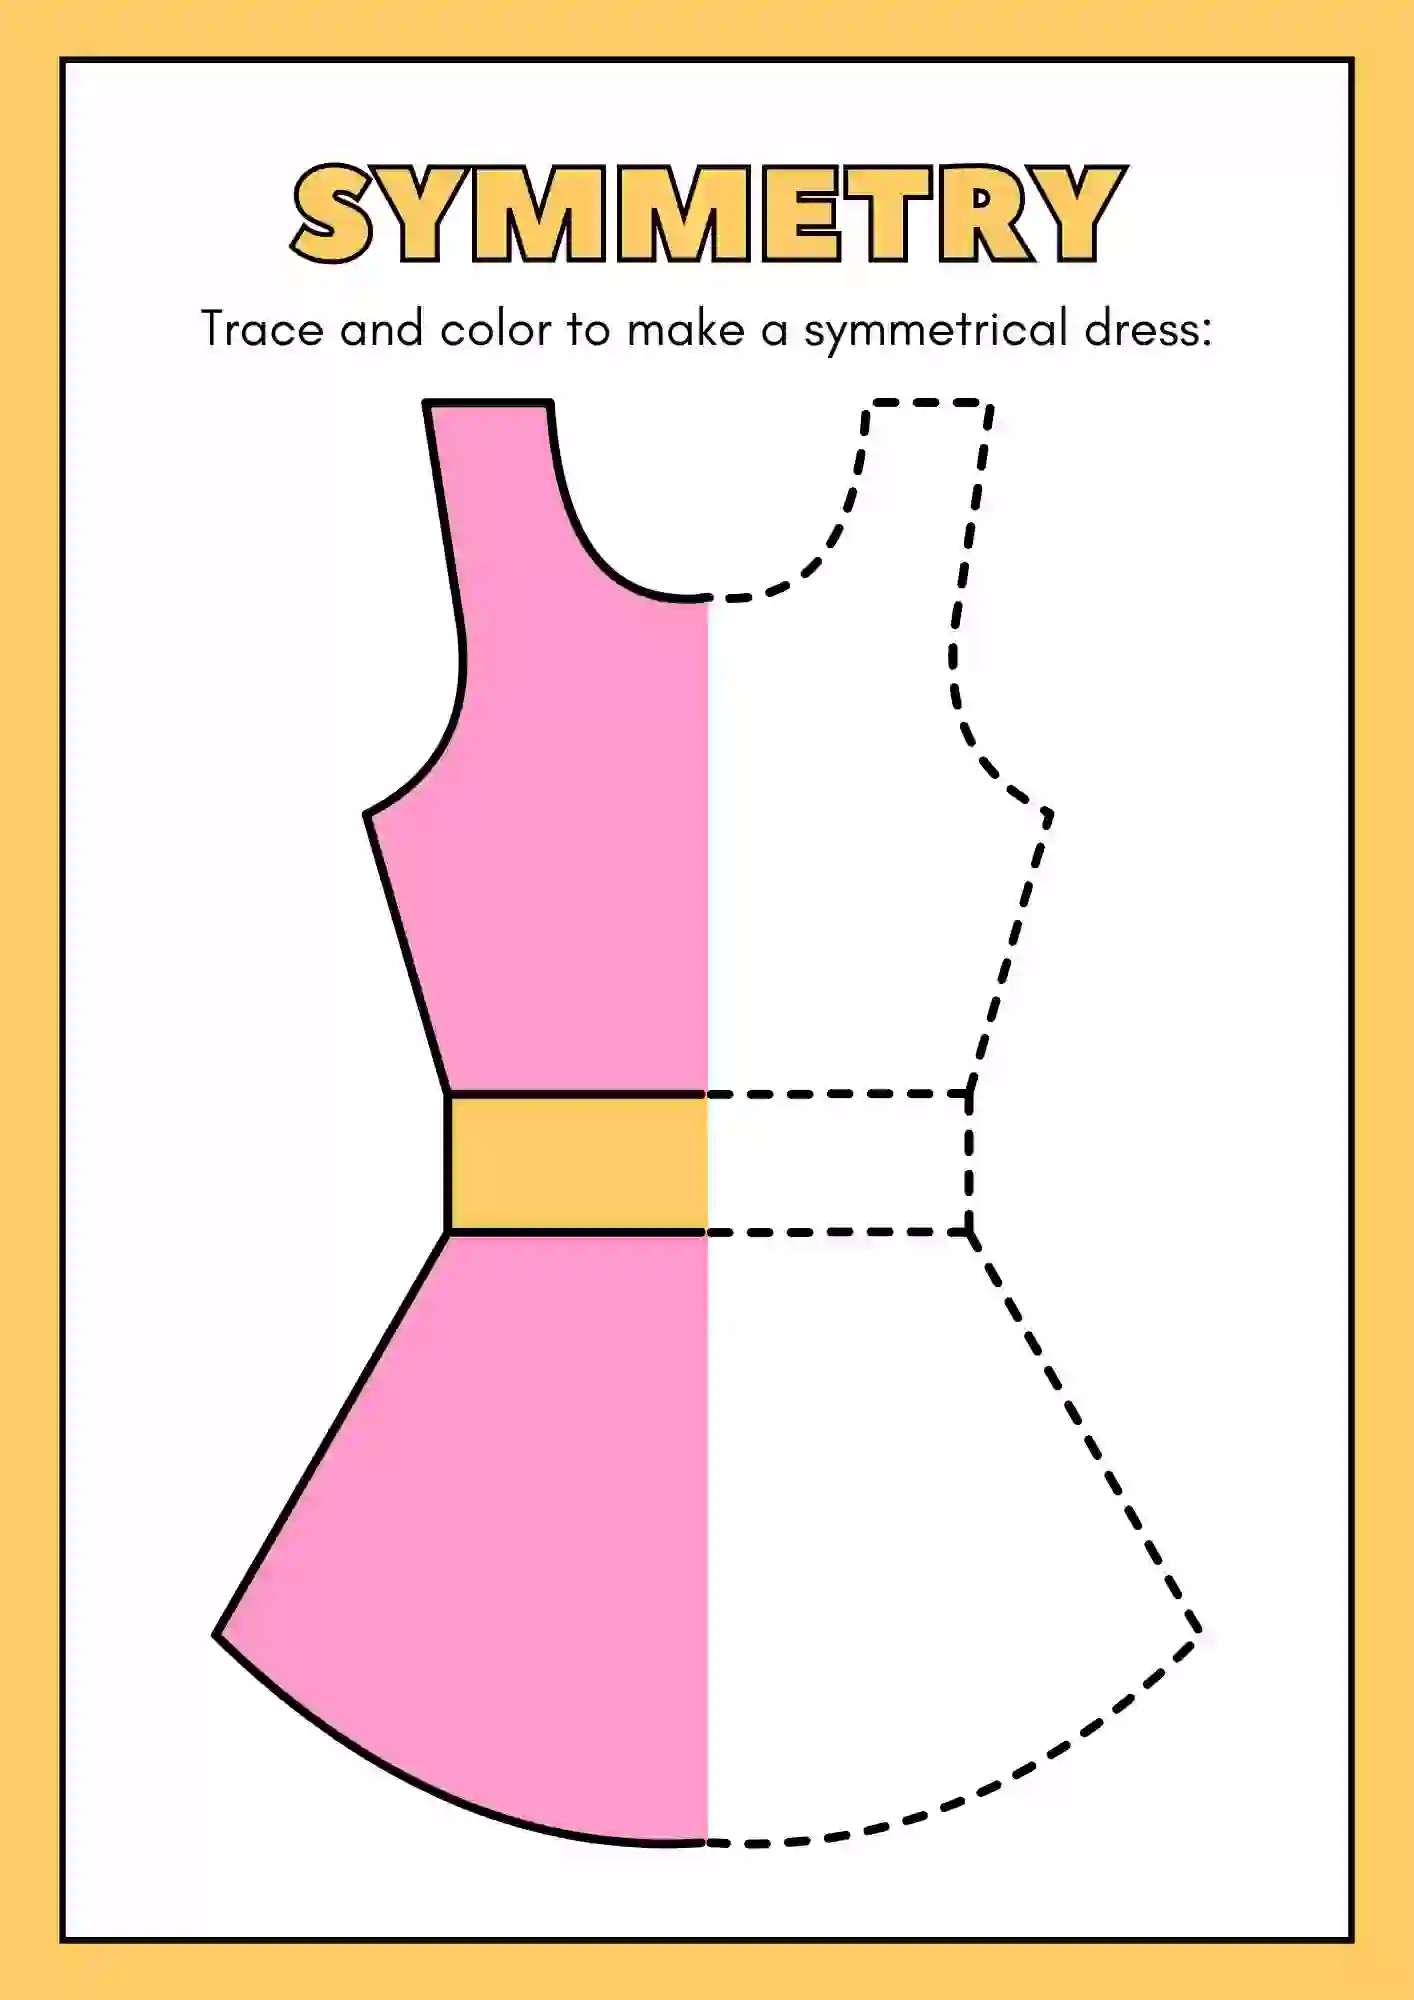 Symmetric Drawing and Coloring worksheets (dress)